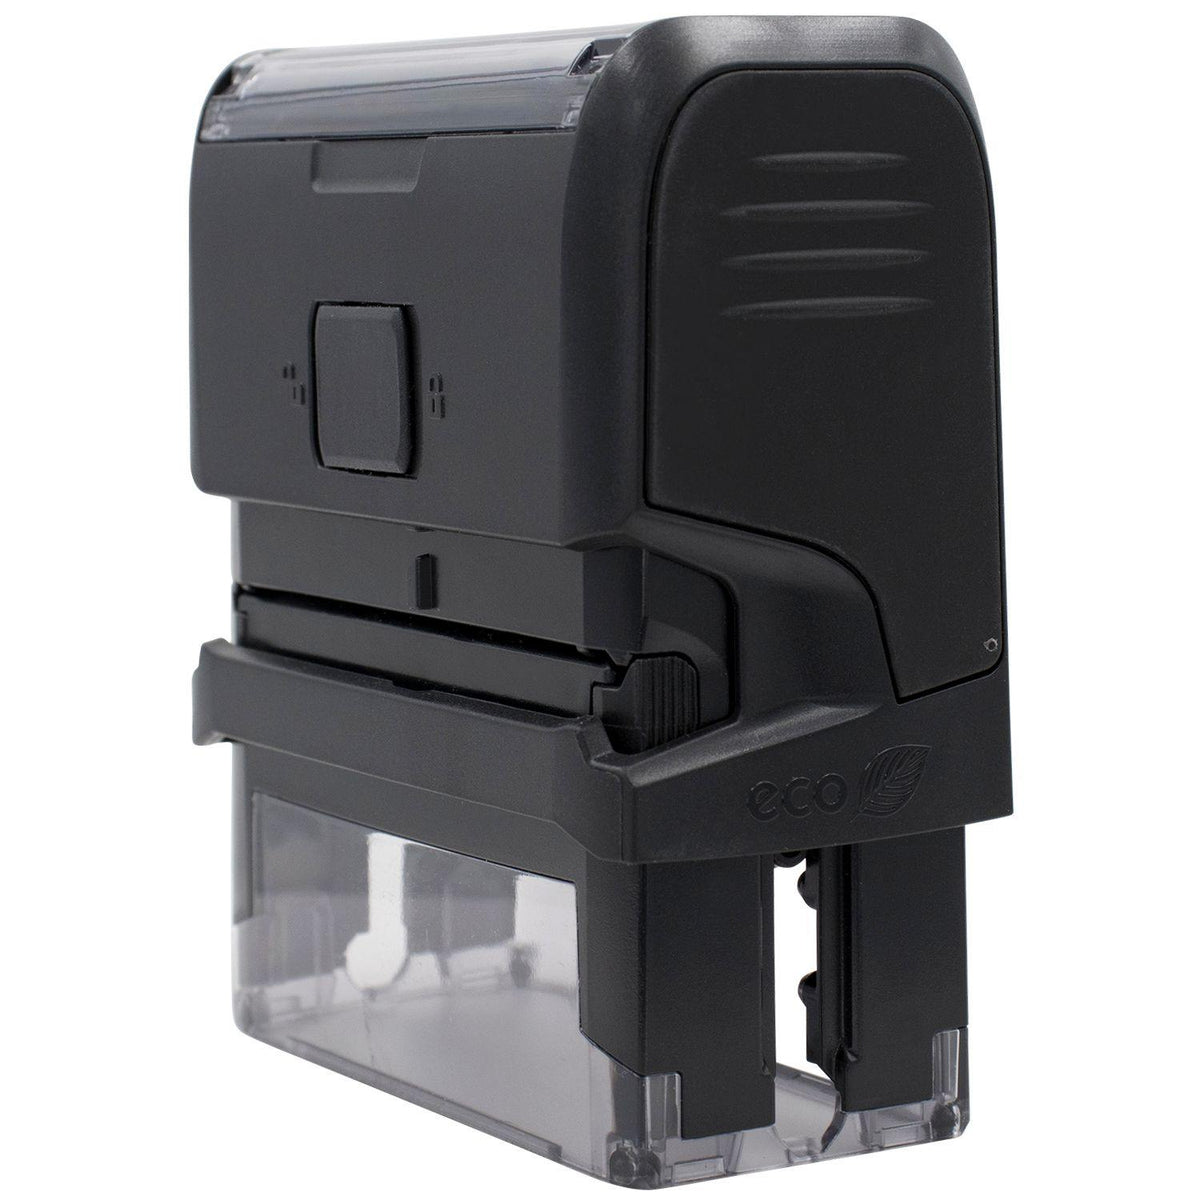 Self Inking Fyi Stamp - Engineer Seal Stamps - Brand_Trodat, Impression Size_Small, Stamp Type_Self-Inking Stamp, Type of Use_General, Type of Use_Teacher